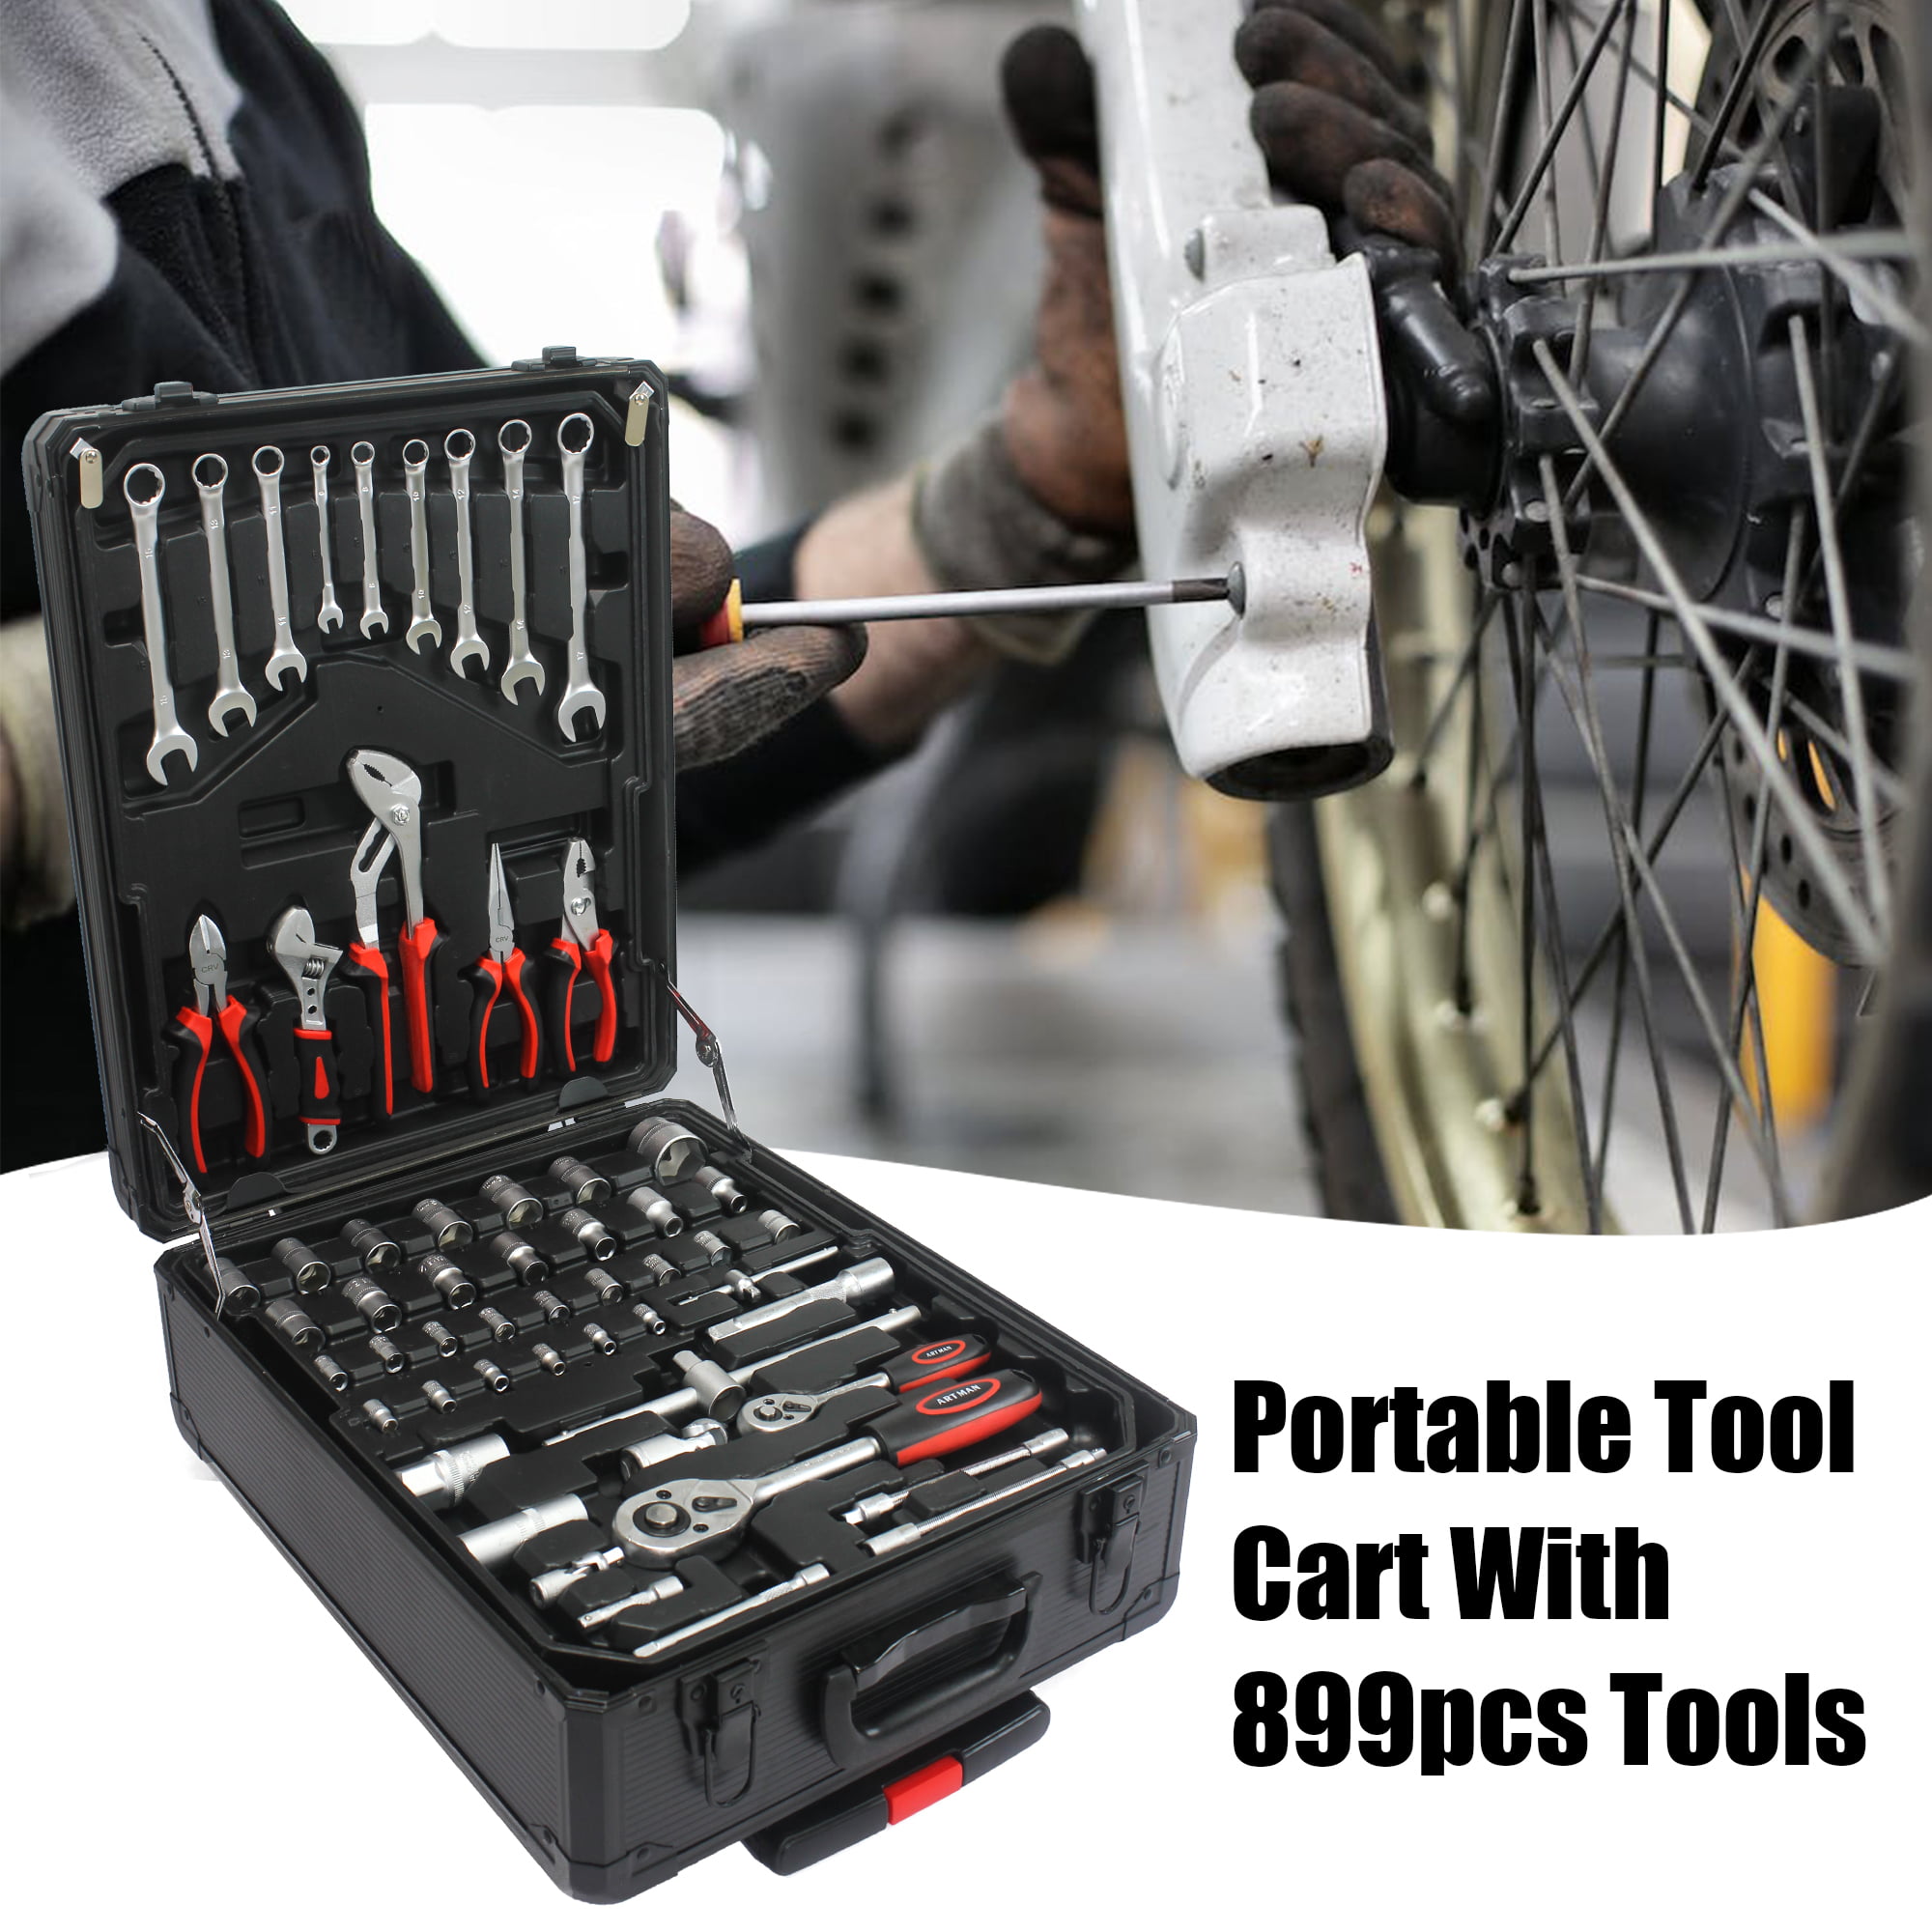 339-Piece Mechanics Tool Set - Universal Professional Tool Kit with Metal  Case Box, 3-Drawer Tool Box With Tools, Socket Wrench Sets, Screwdriver Sets,  for Workshop Warehouse Repair Shop 